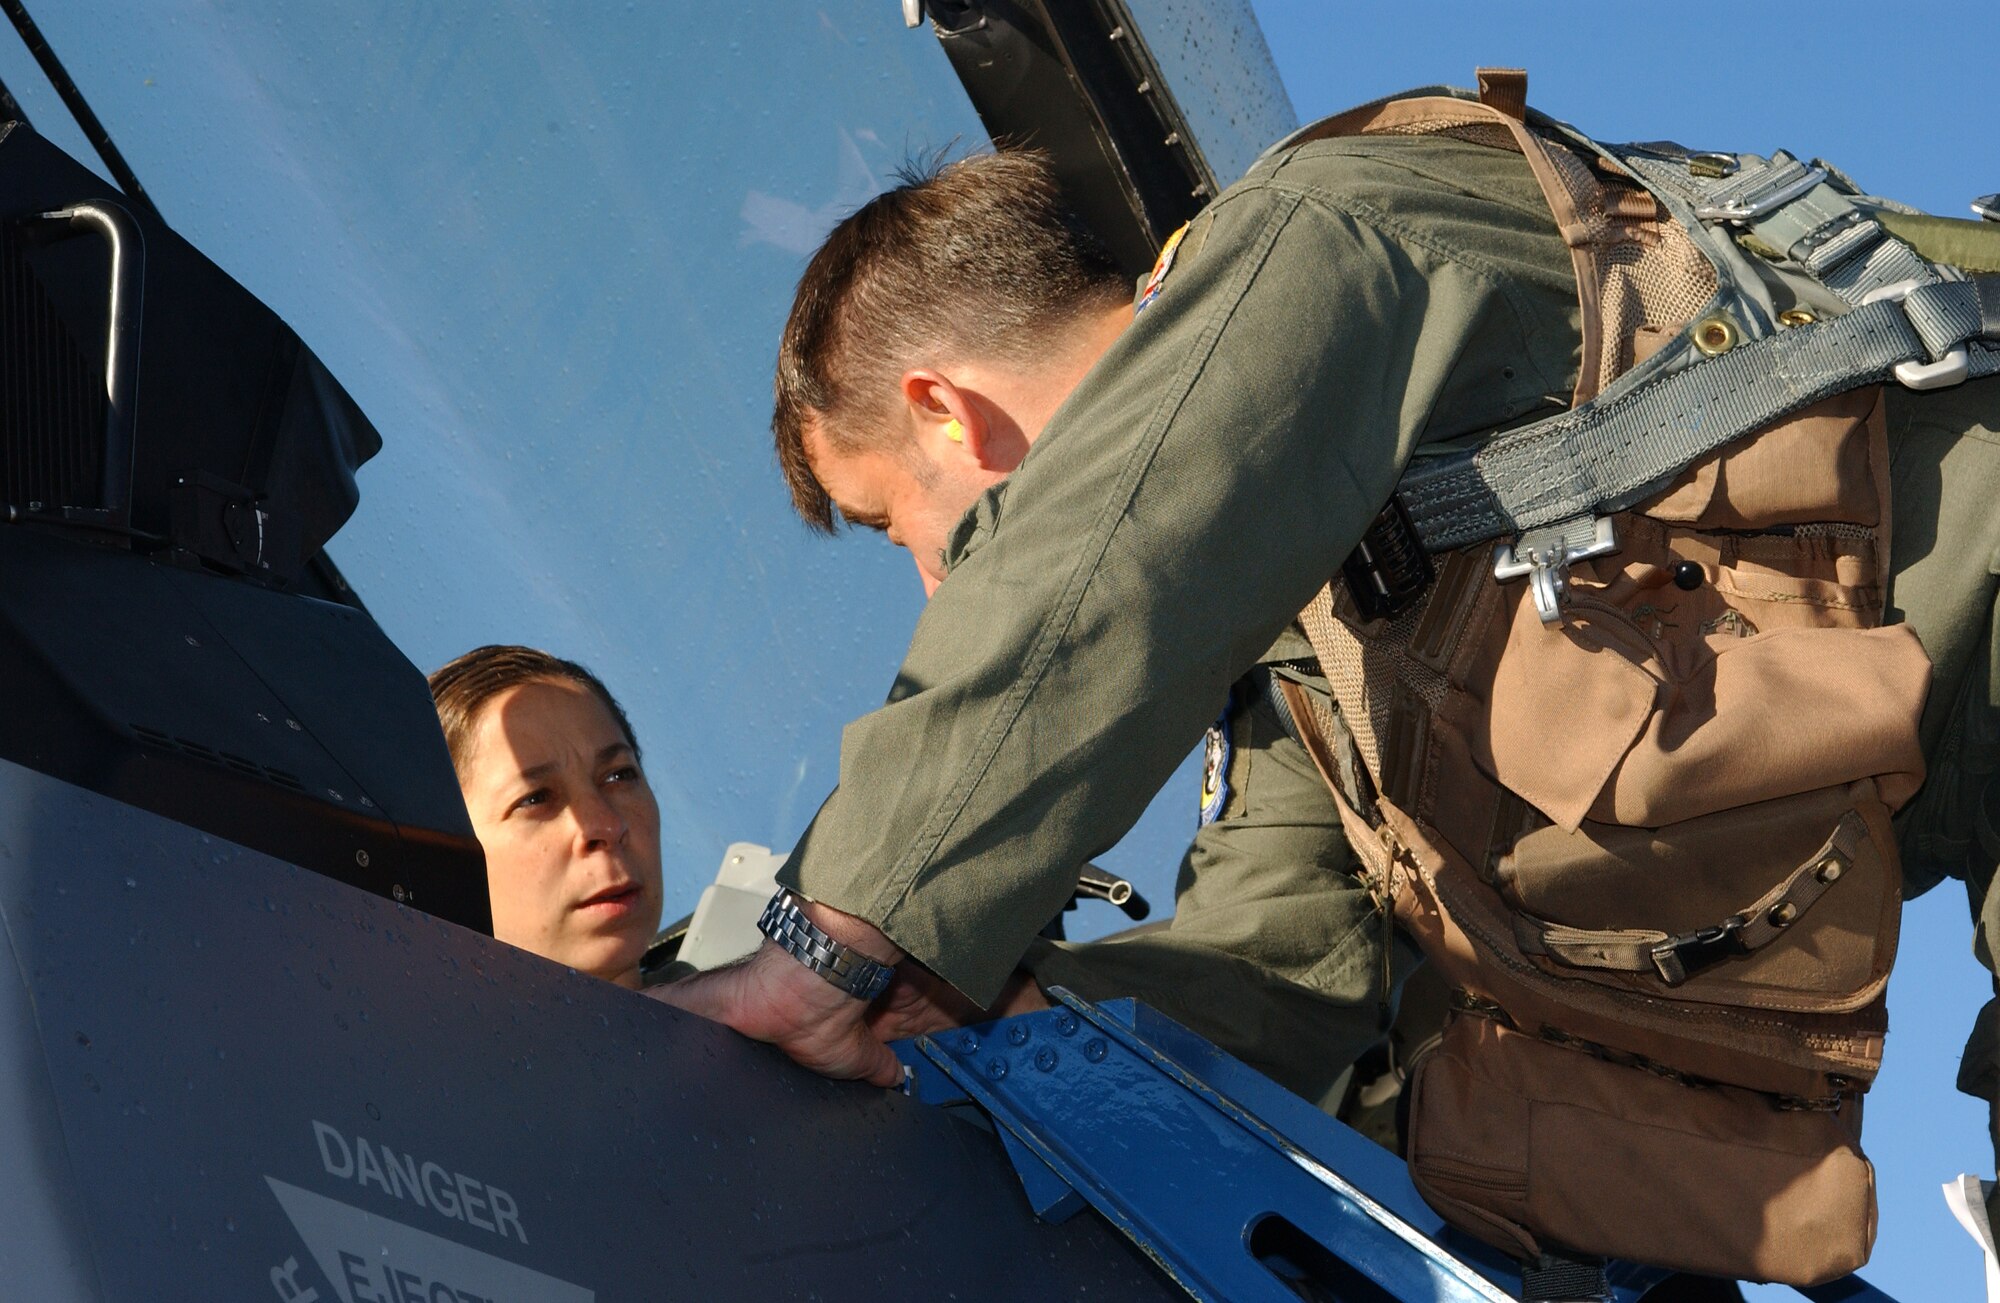 EIELSON AIR FORCE BASE, Alaska--Maj. Norman Johnsen, 354th Operations Support Squadron F-16 pilot, ensures Master Sgt. Deanna Croxen, Eielson Airman Leadership School instructor, is strapped in the jet properly before they begin her incentive flight Sept. 13. The incentive program's purpose is for group commanders to acknowledge the hard work and dedication of their Airmen. (U.S. Air Force photo by Airman 1st Class Nora Anton)                                